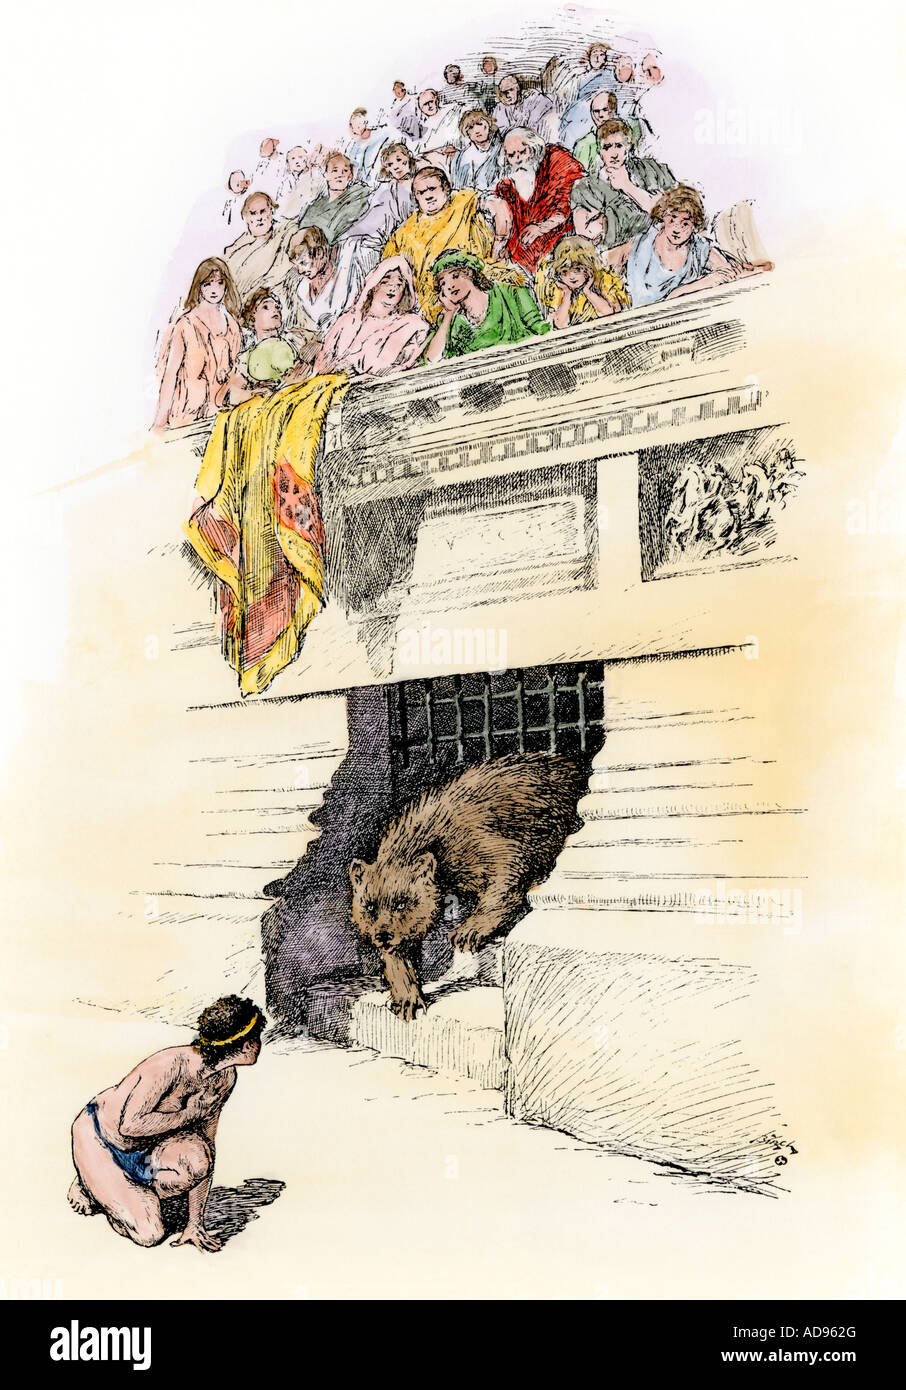 Crouching girl facing a hungry bear in an ancient Rome arena. Hand-colored woodcut Stock Photo